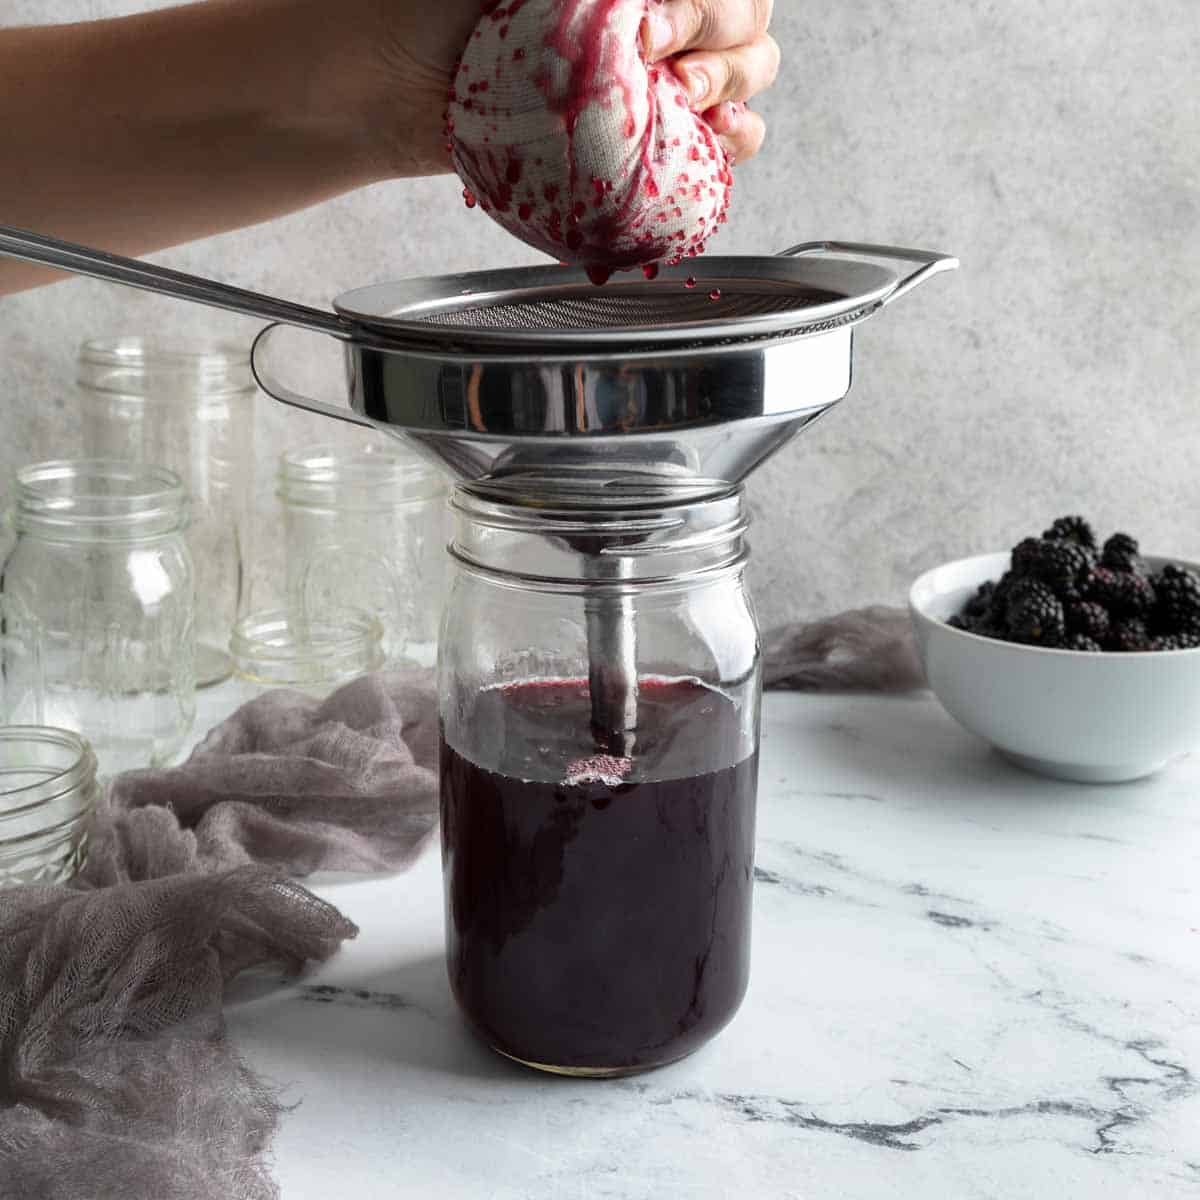 squeezing the berries in cheesecloth over a mason jar